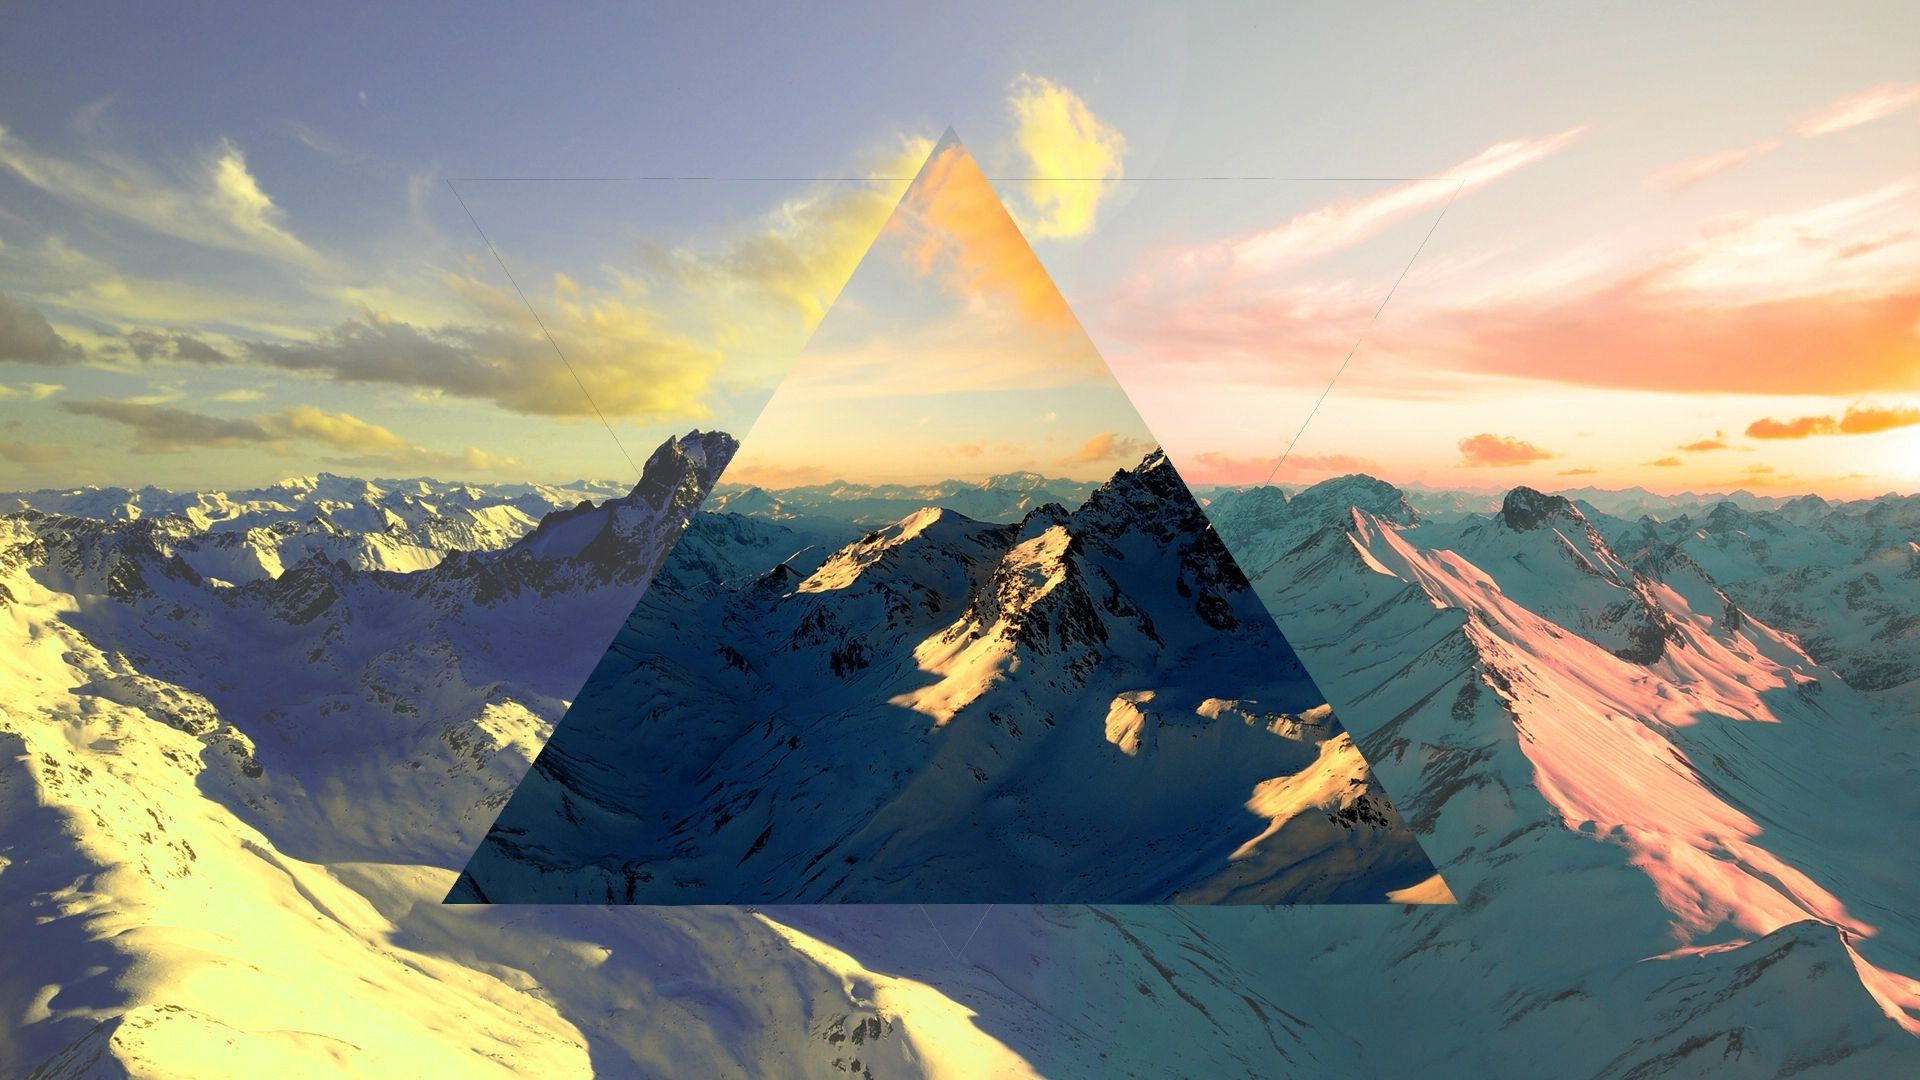 Abstract Mountain Wallpapers